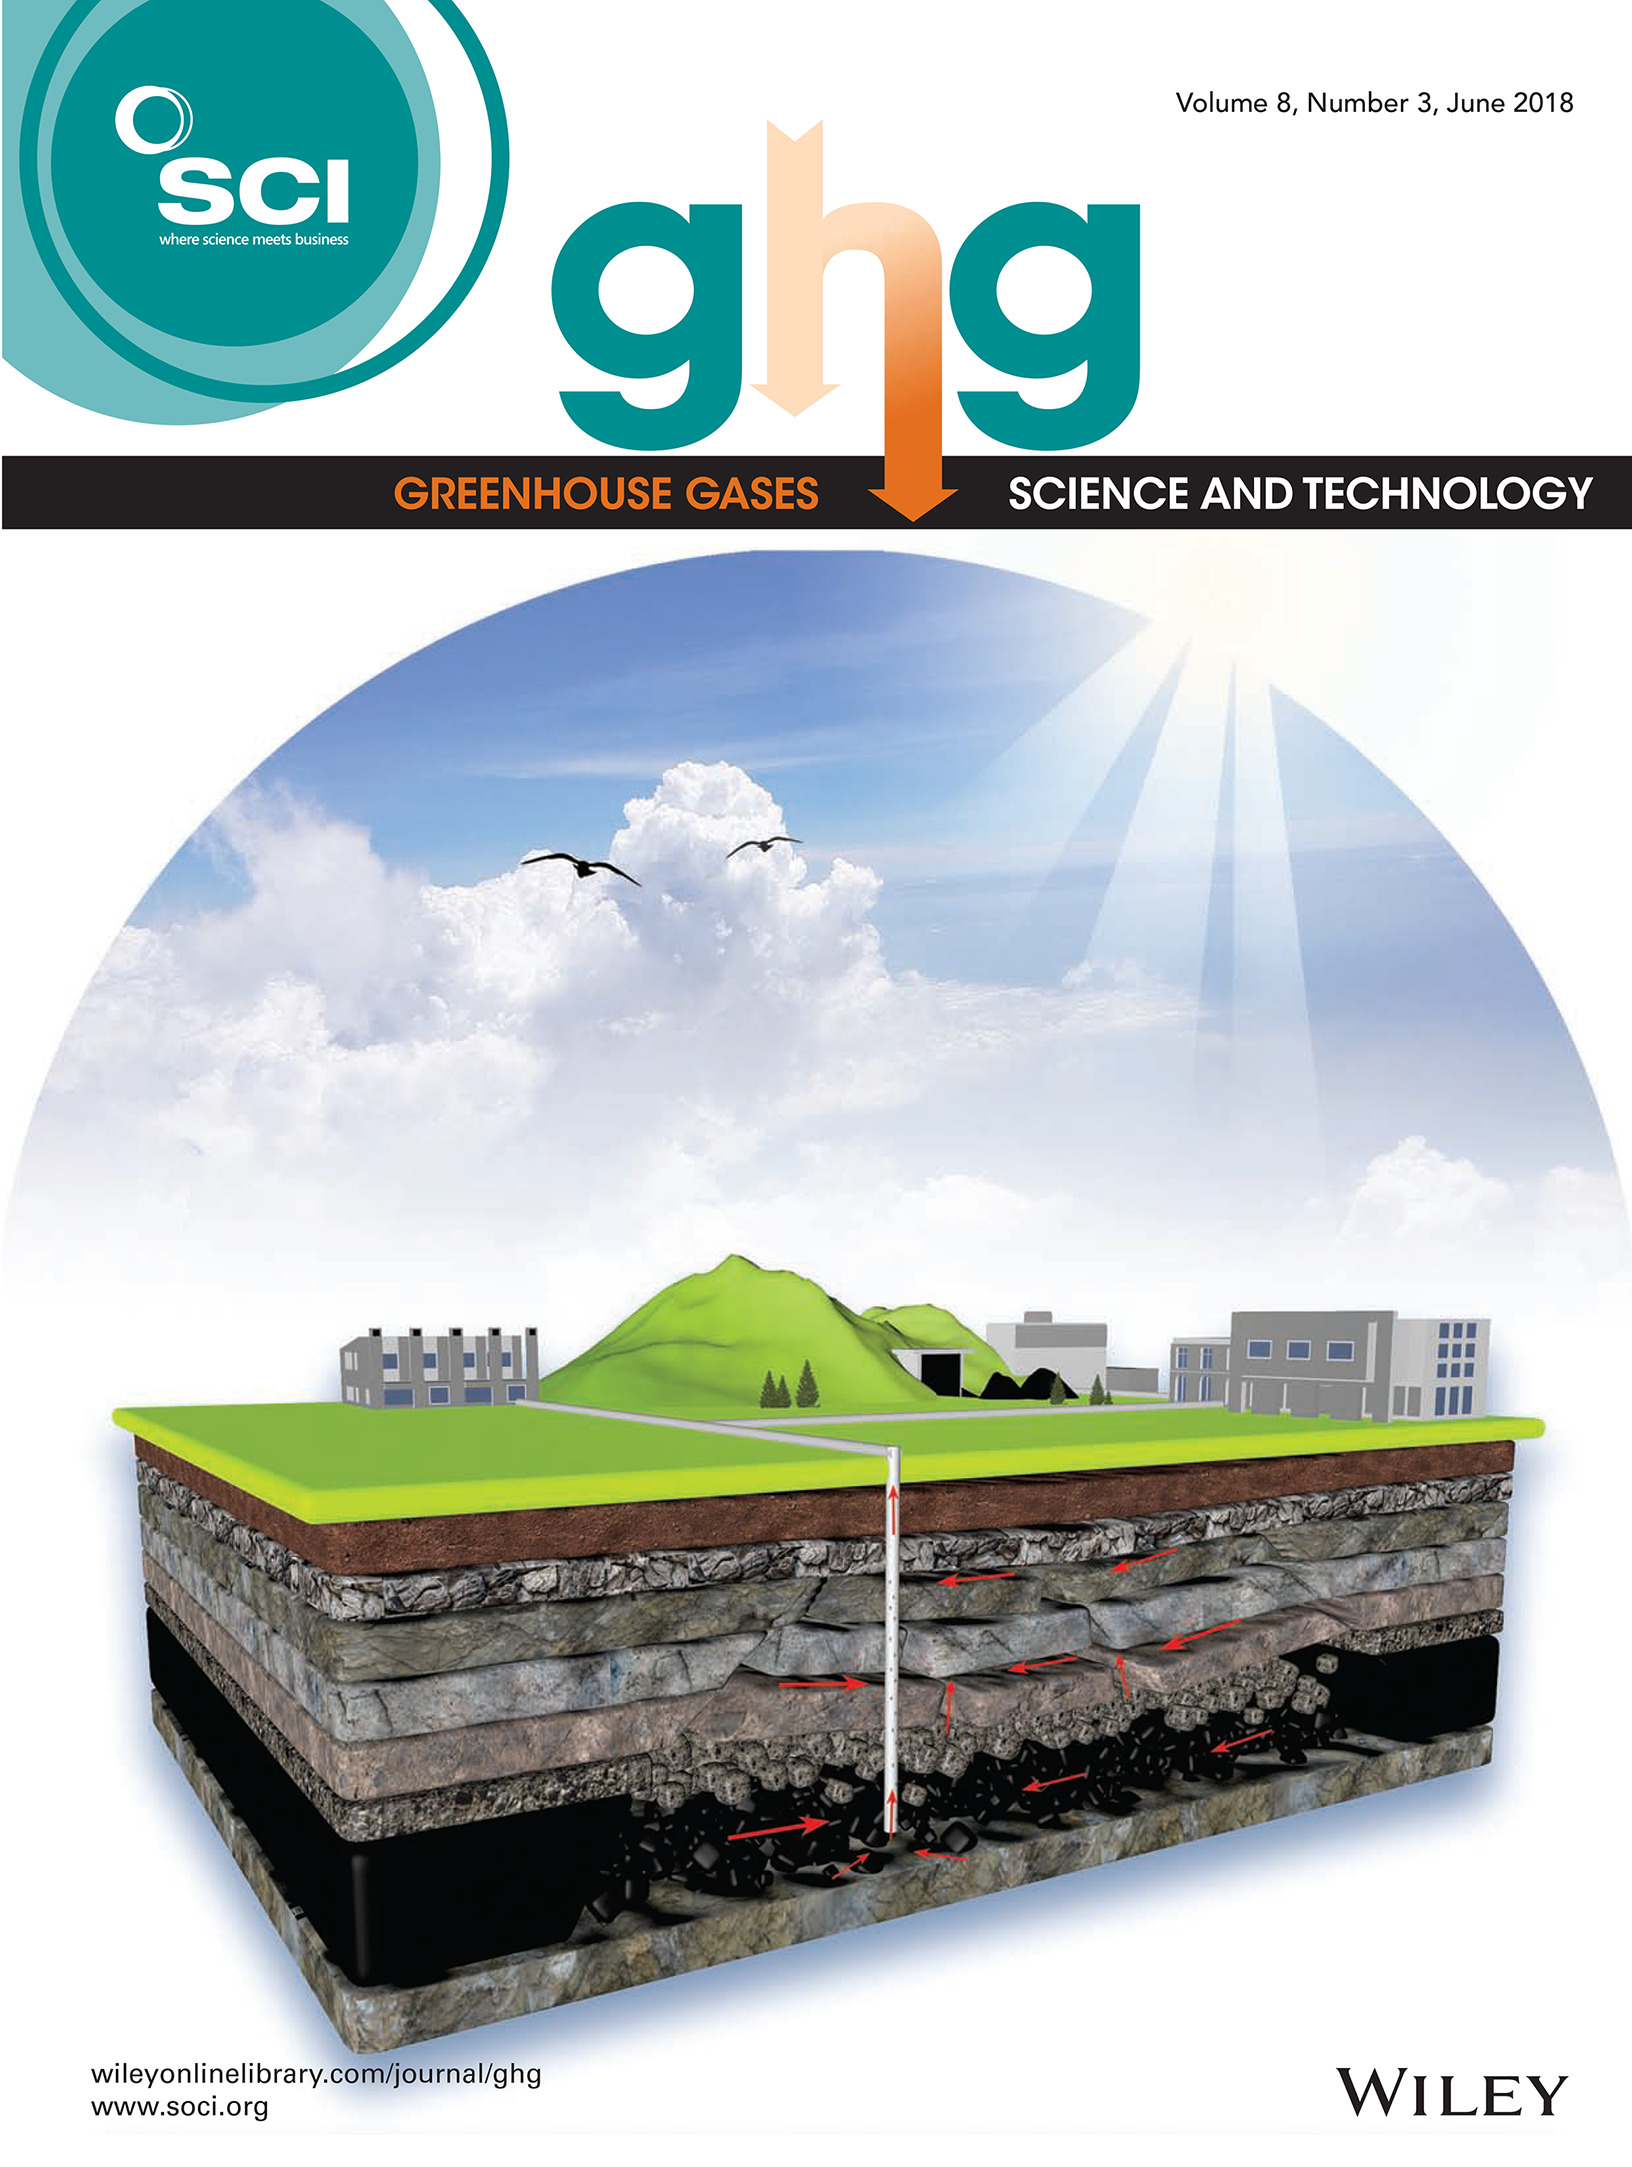 Greenhouse Gases-Science and Technology期刊封面